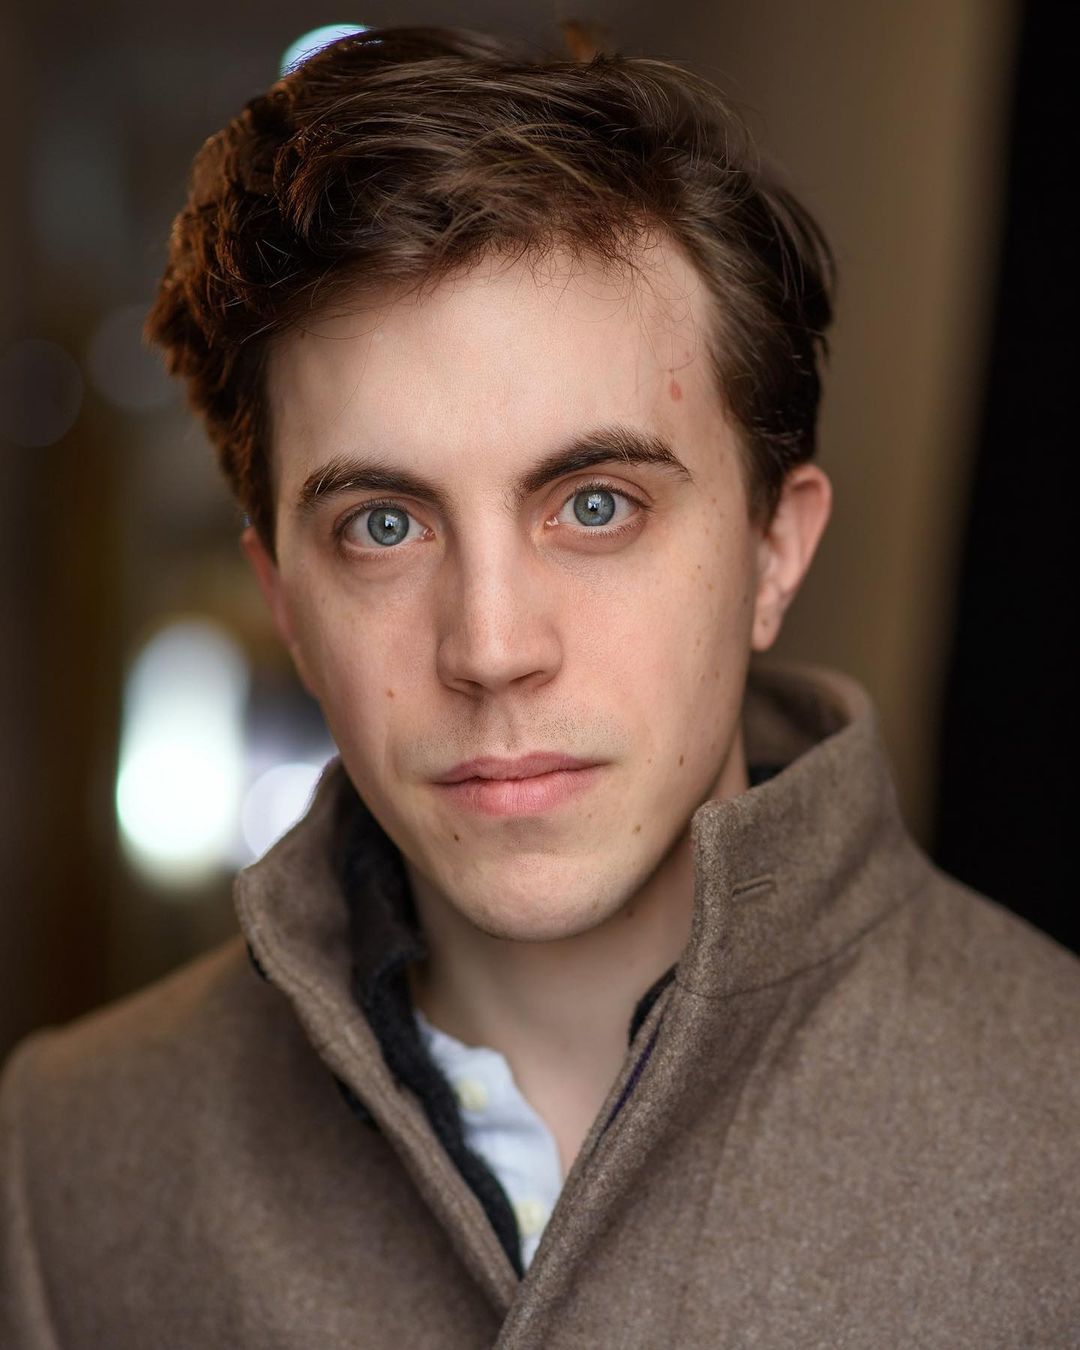 Felix Trench (@felixtrench) is an actor and writer from London, England and raised in Brussels, Belgium. He has trained at Drama Studio London and The Actor’s Centre as well as studied improv at Upright Citizens Brigade and the Free Association....